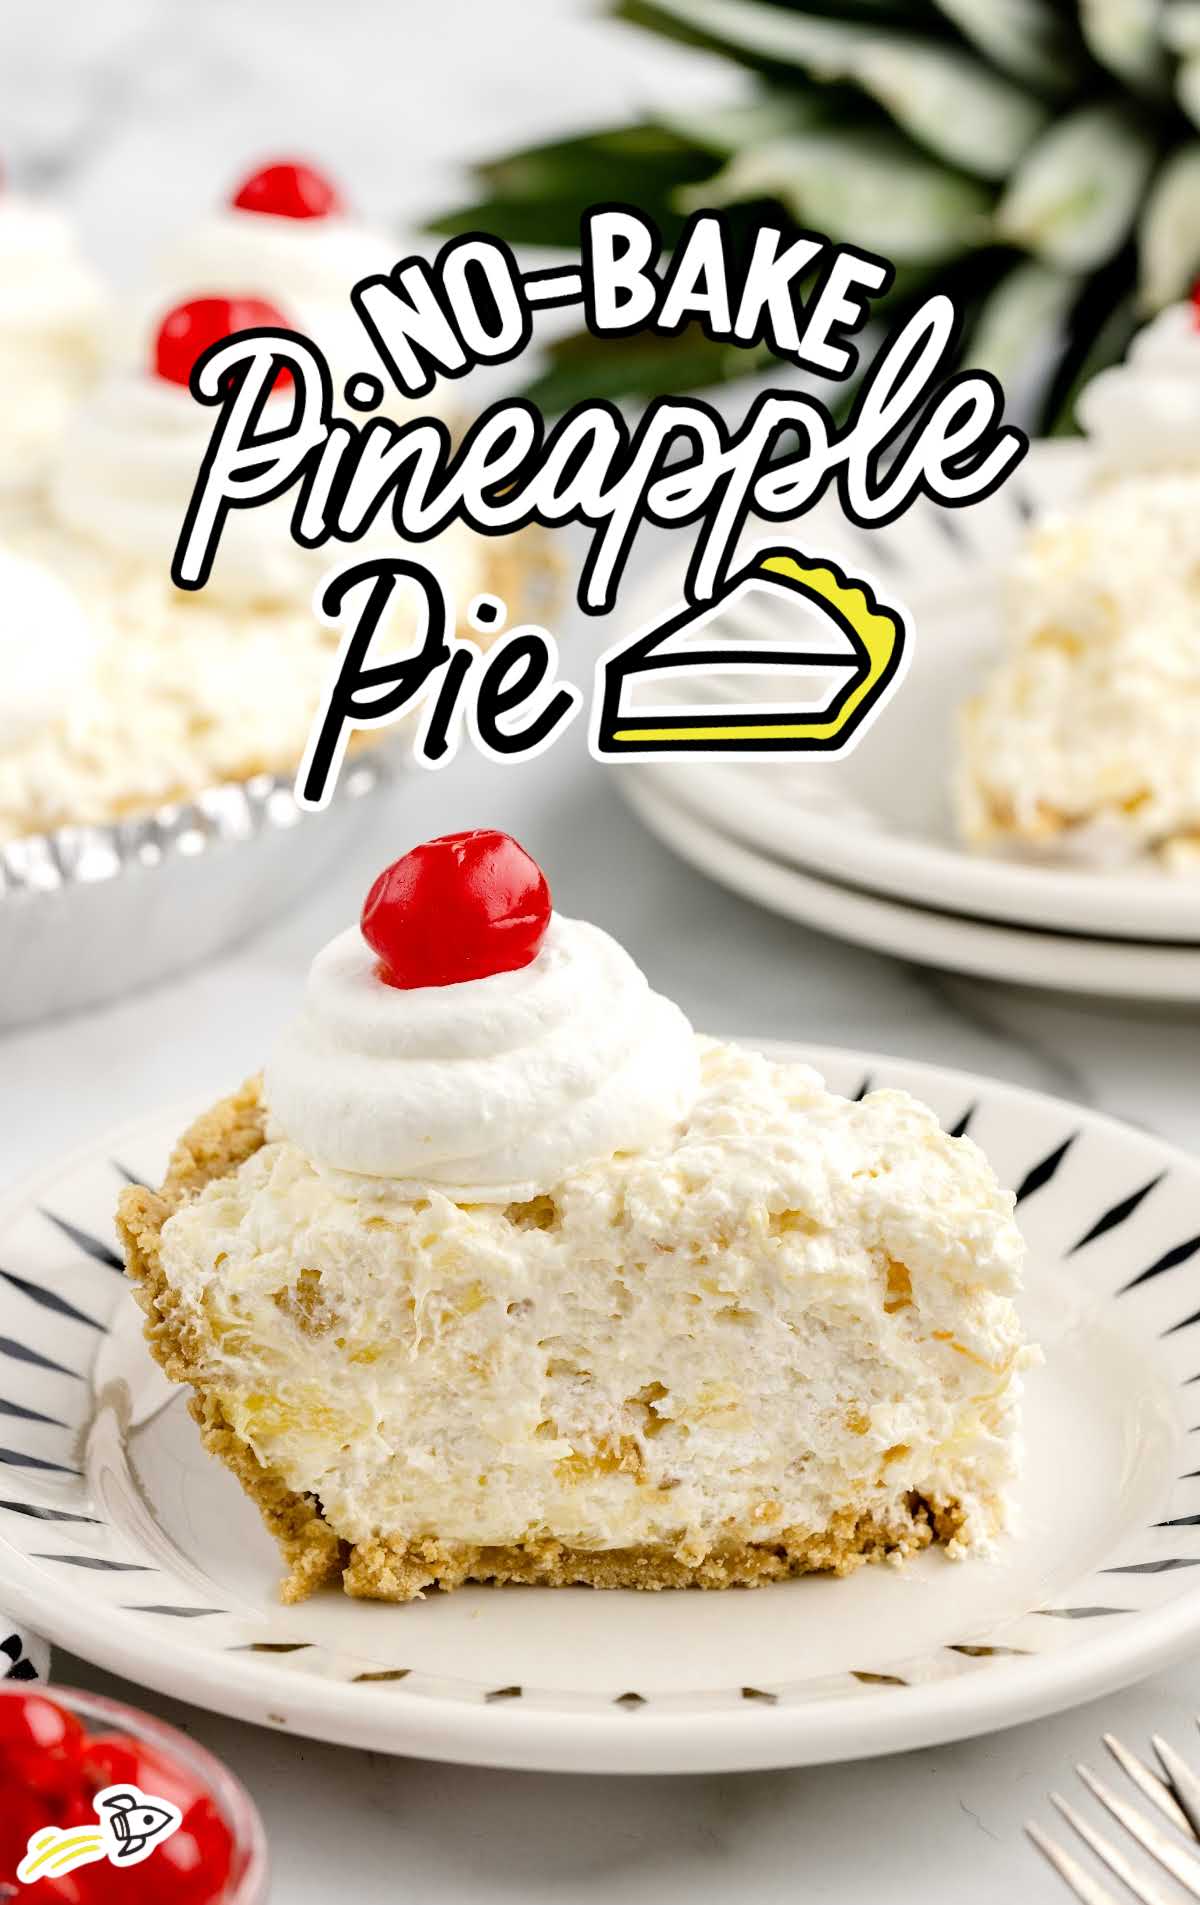 a slice of Pineapple Pie topped with whipped cream and a cherry on a plate